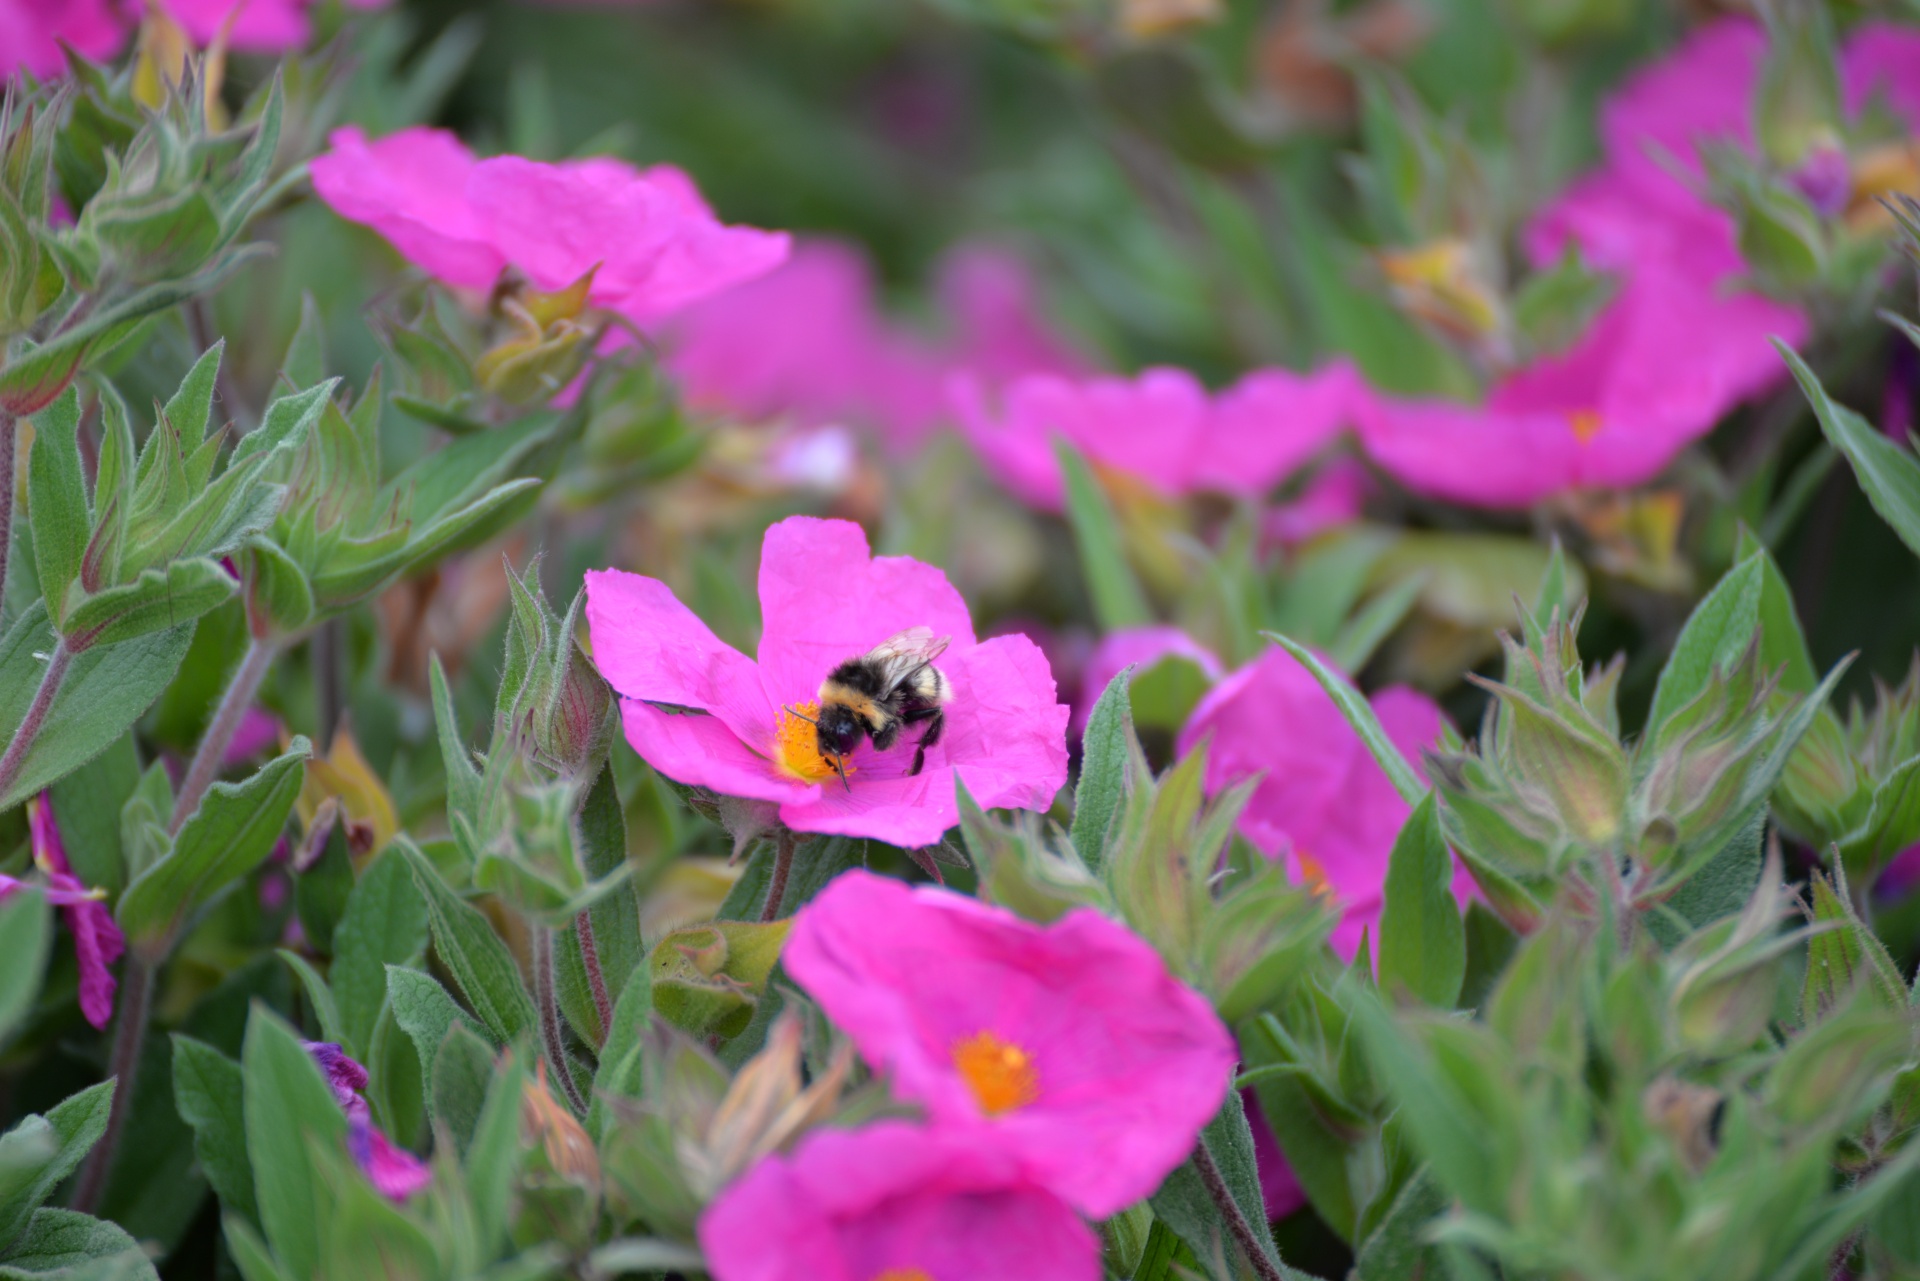 Bumblebee pollinating a flower